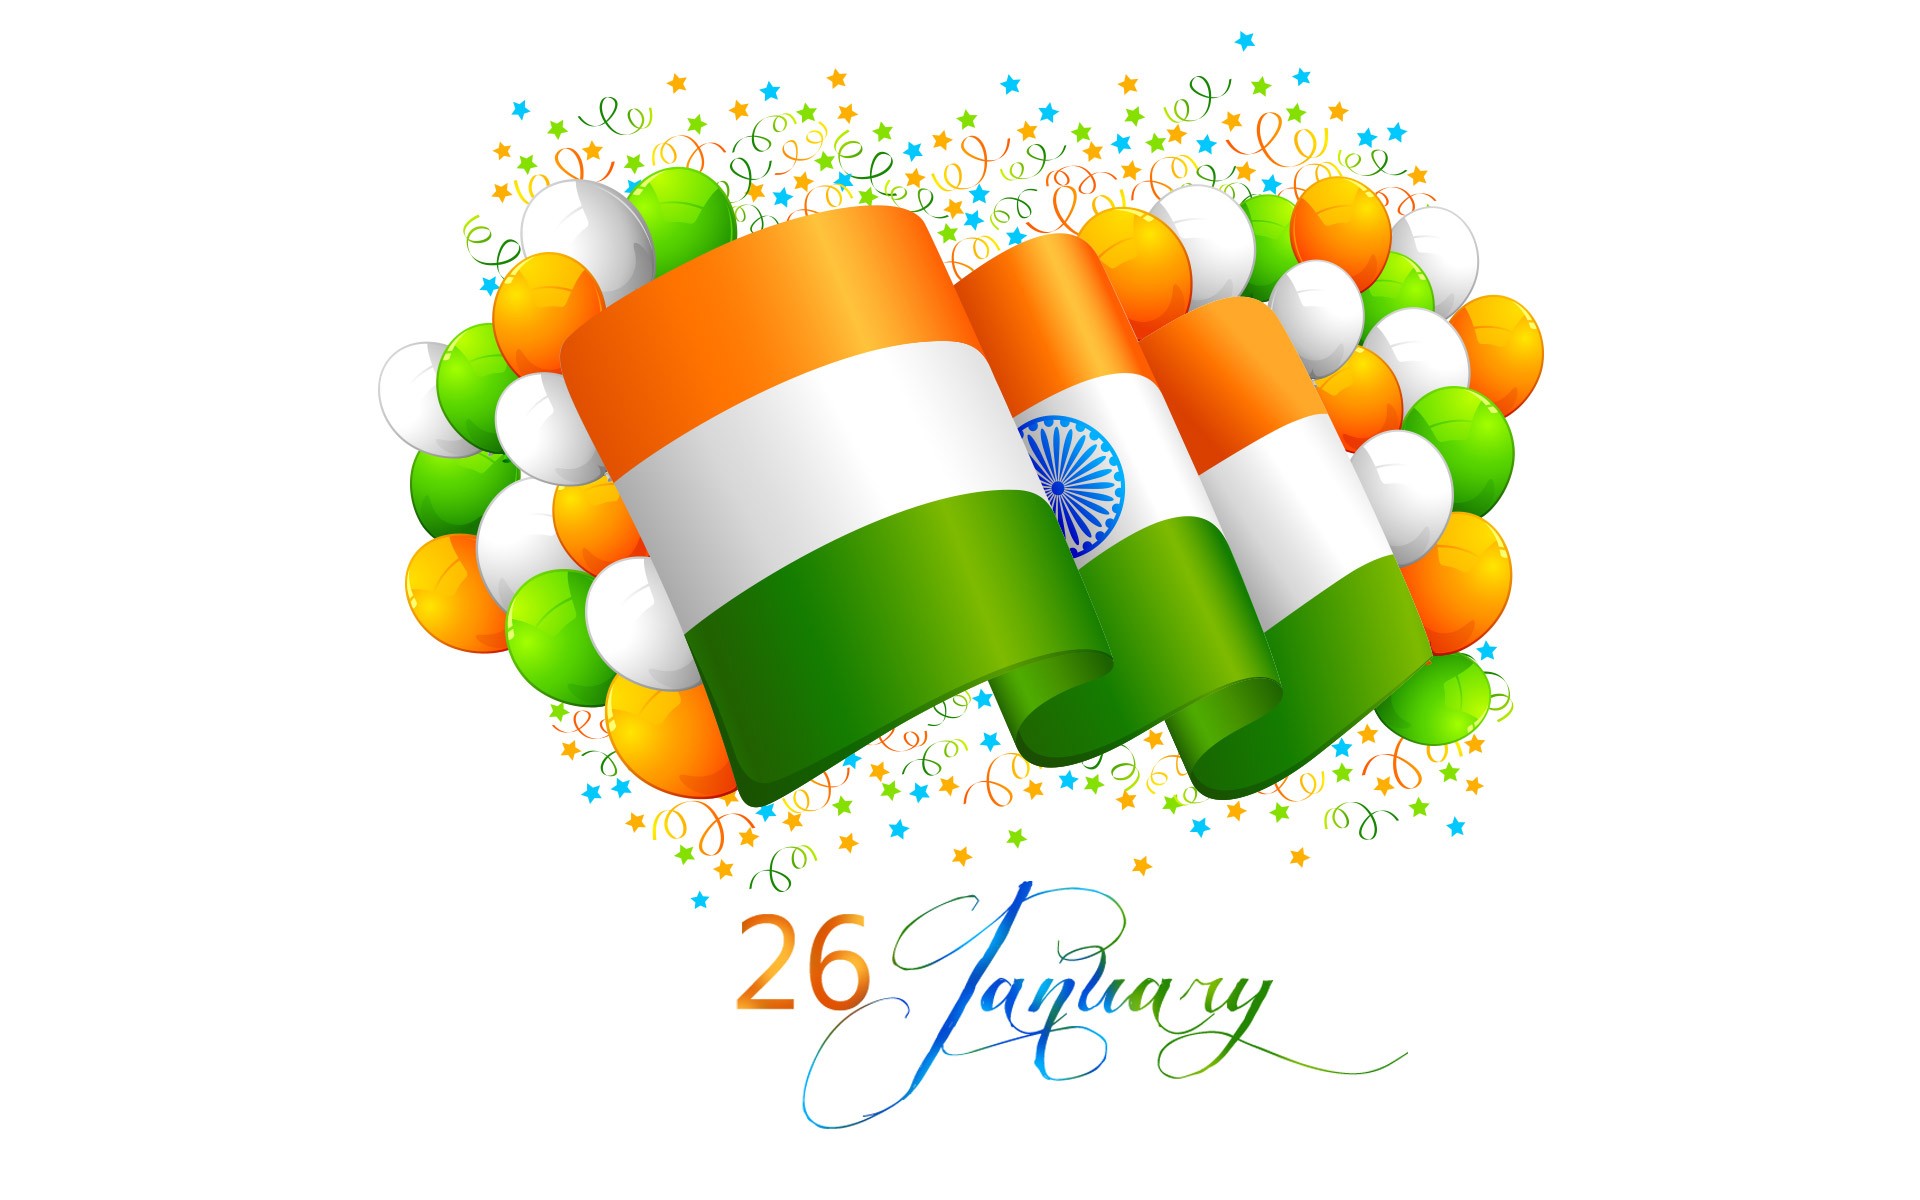 Happy Independence Day 2017 India - HD Wallpaper 